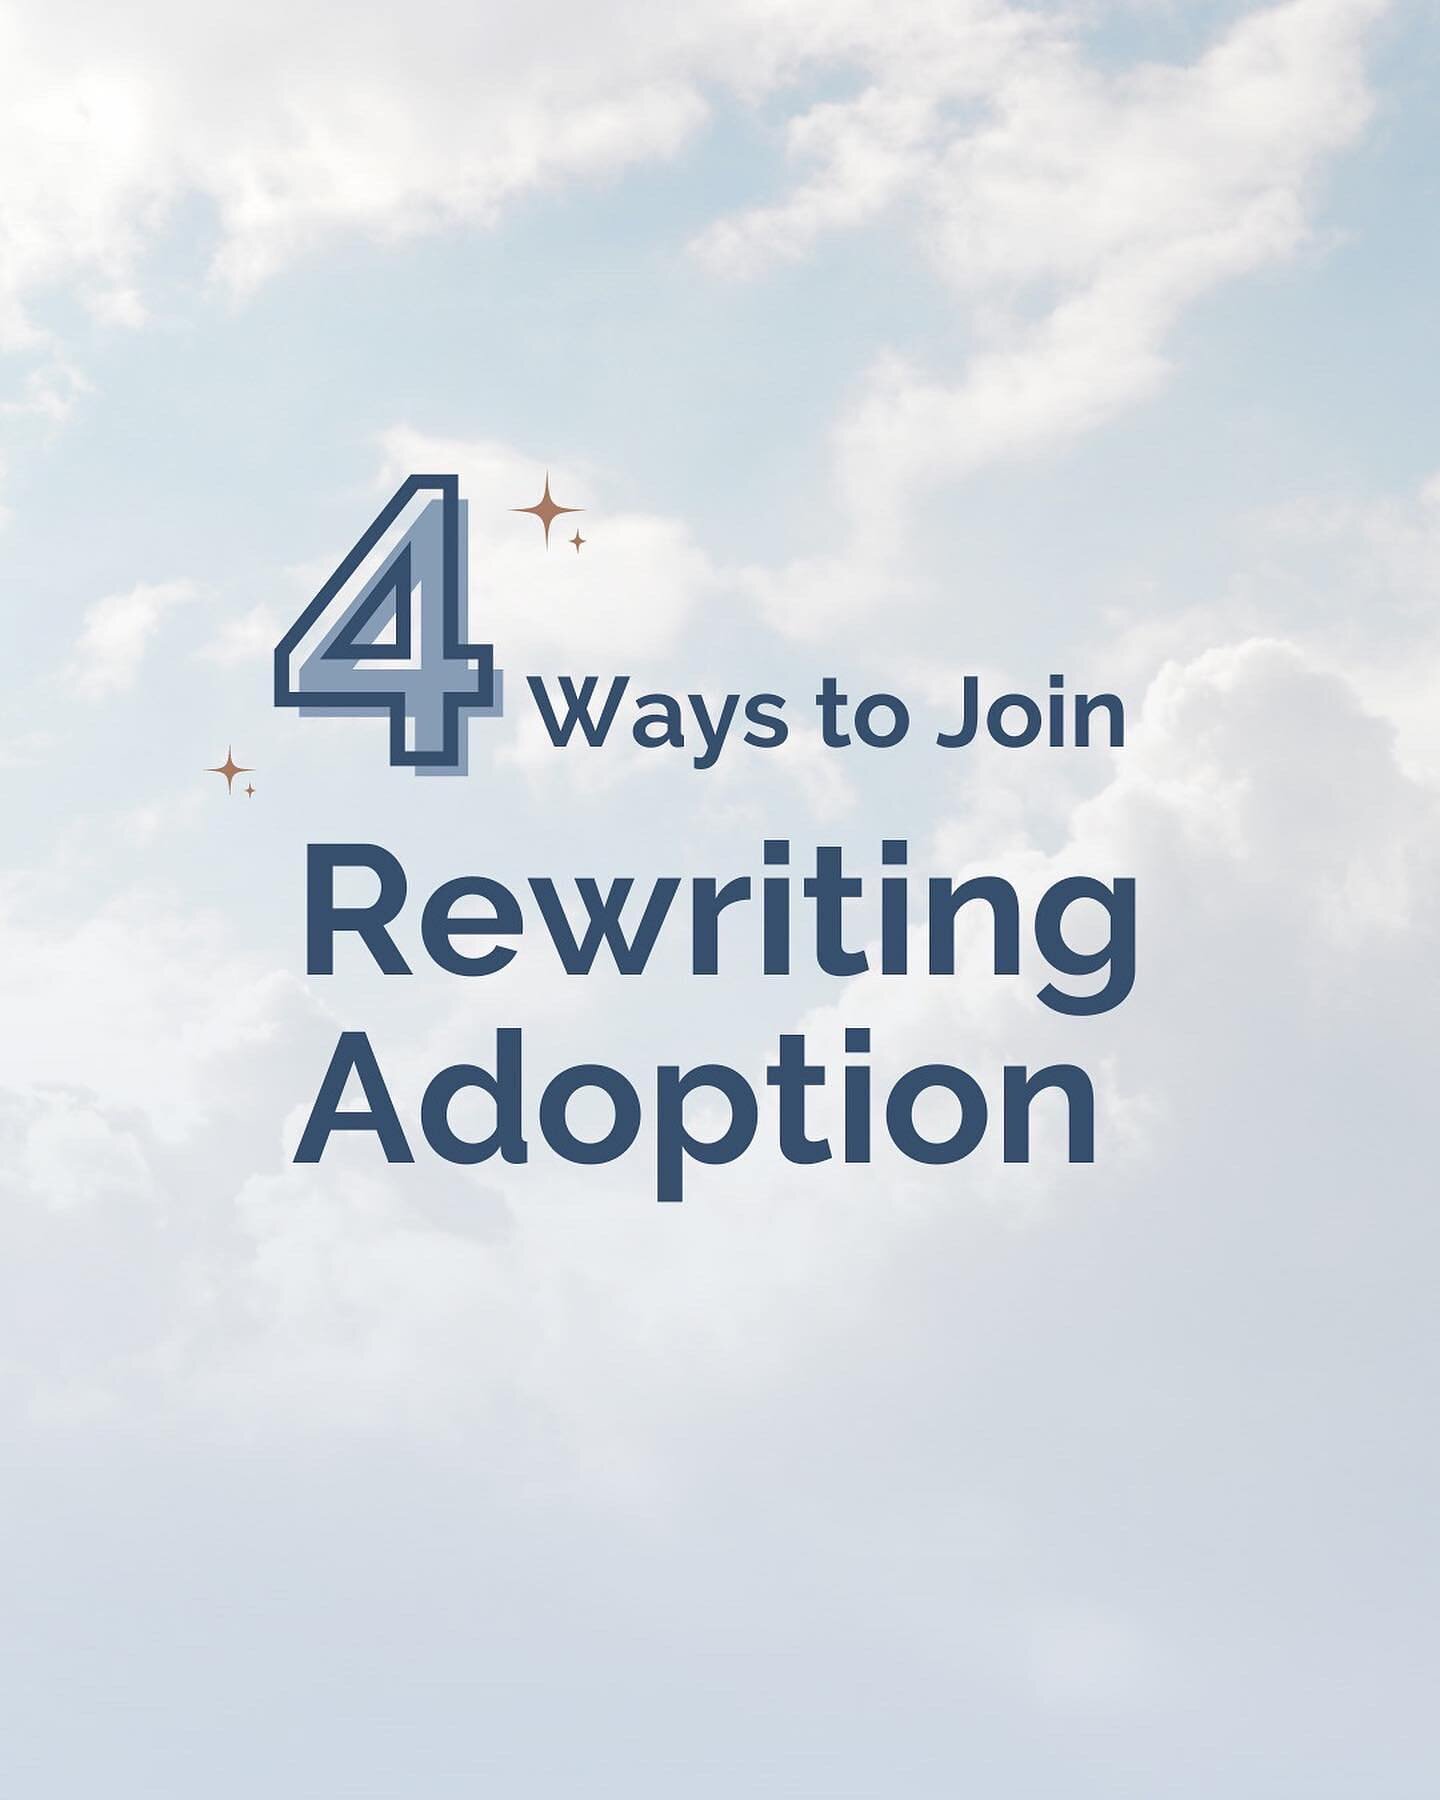 Swipe ➡️ for four ways to join us and how to sign up!

✍️ Want to share your story? Write with us!

🗣 Do you like Instagram polls? Become an Adoptee Rep!

💛 Looking to discuss adoption topics and find support from other adoptees? Register for our a